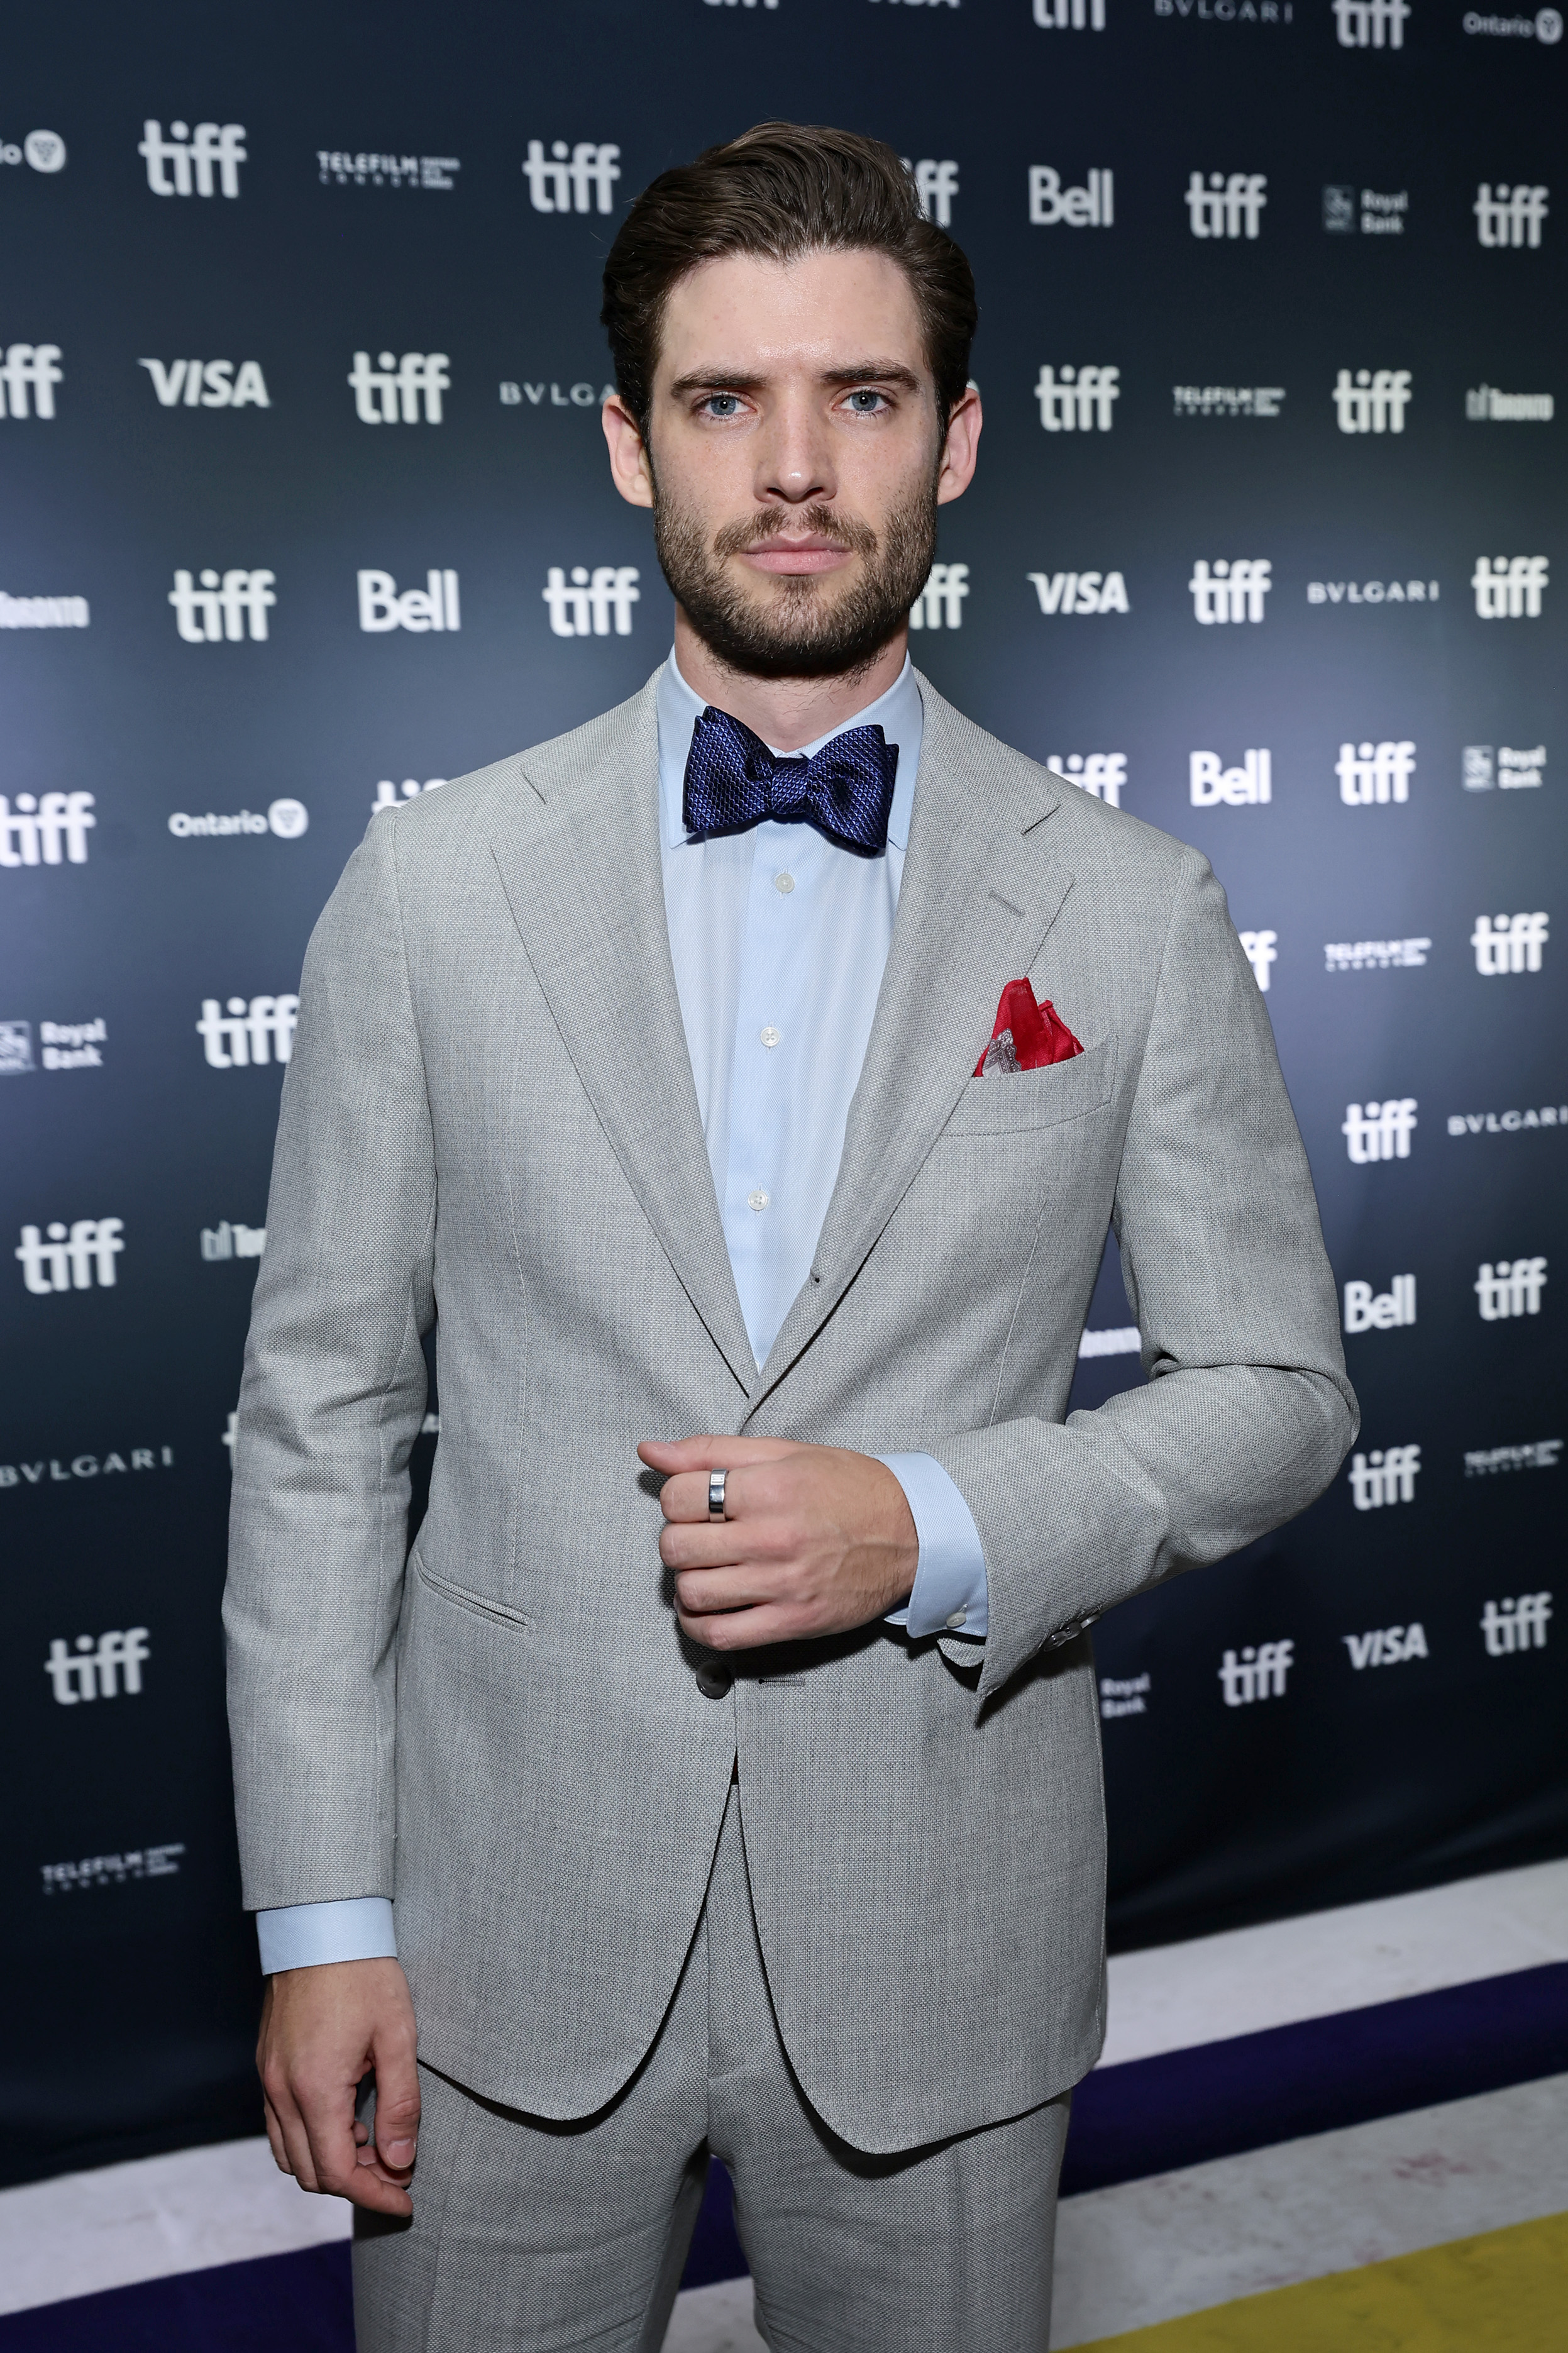 David Corenswet at the premiere of "Pearl" during the Toronto International Film Festival in Toronto, Ontario on September 12, 2022 | Source: Getty Images